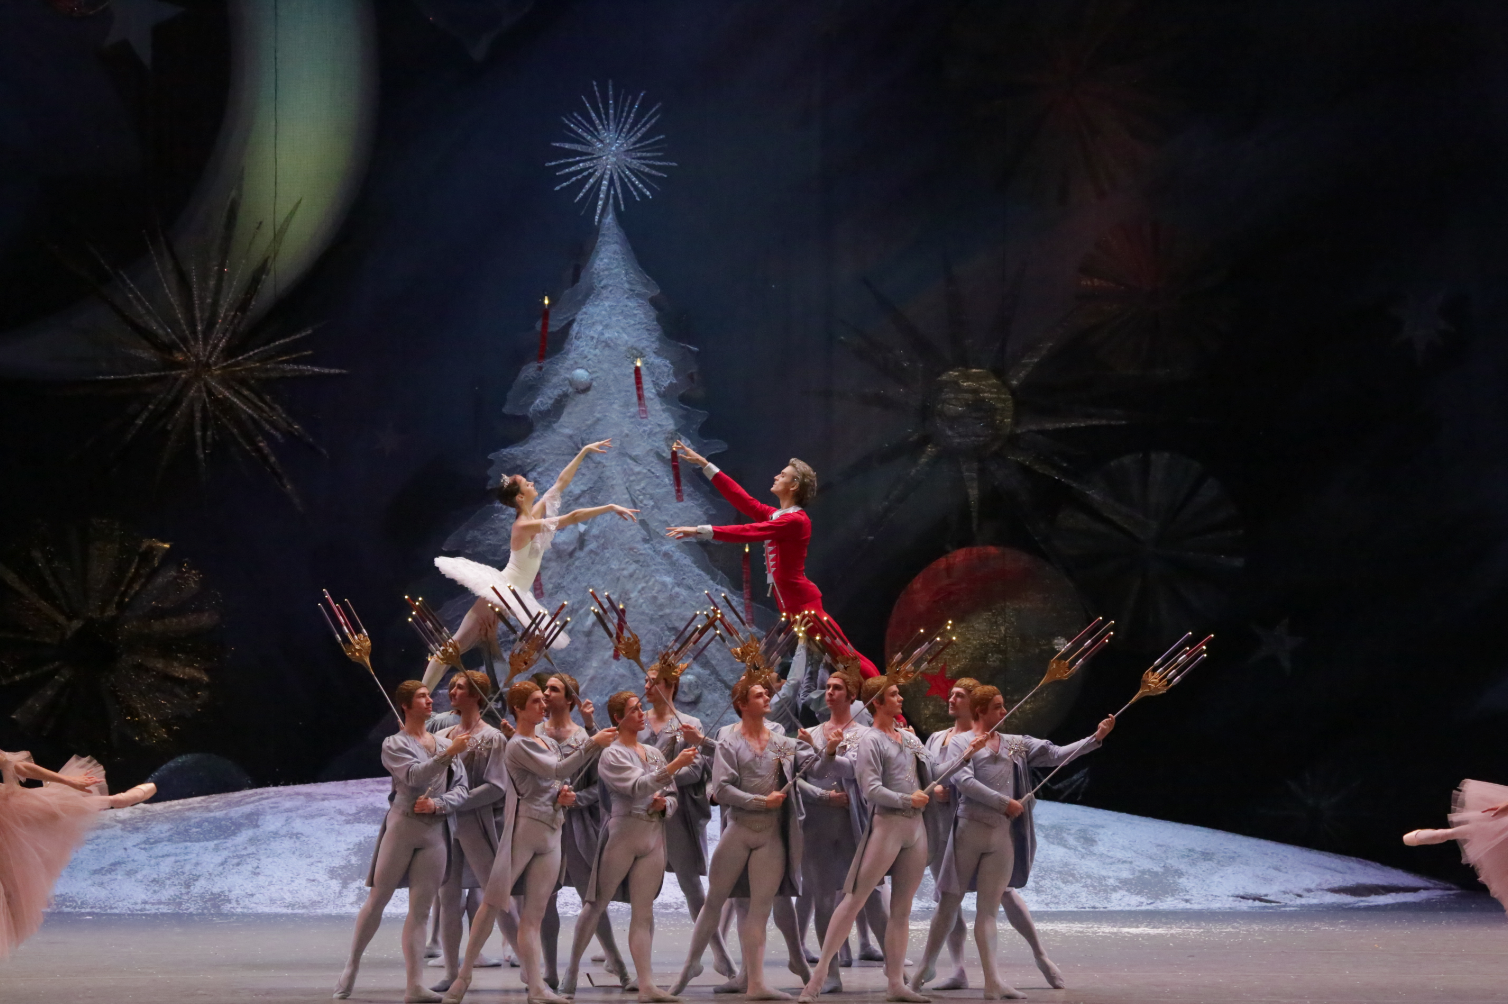 "The Nutcracker" has become one of the most popular ballets in the world.